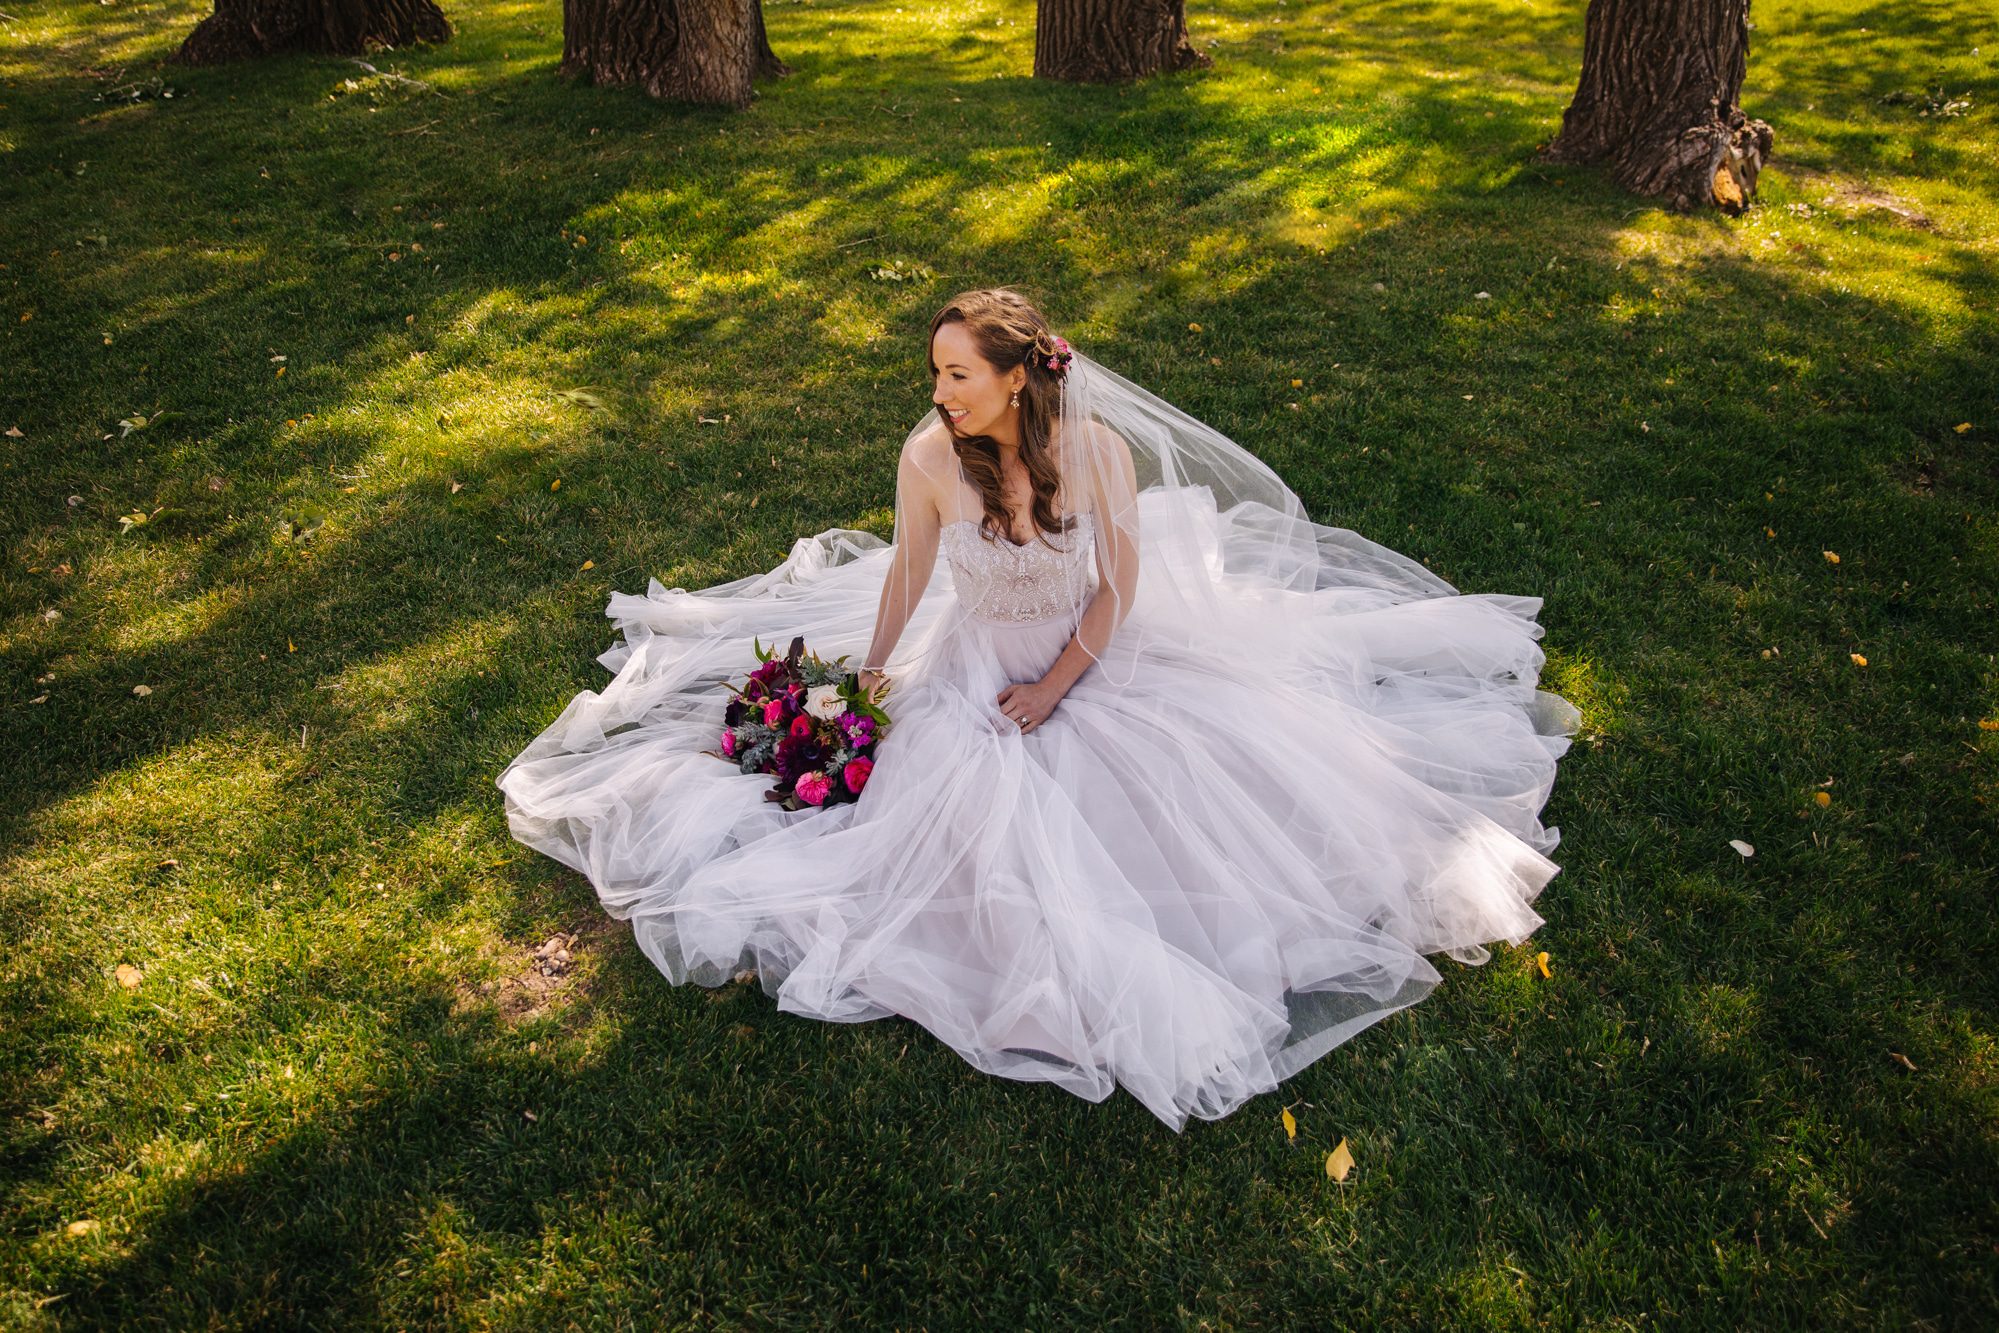 bride with dress fanned out, bride sitting down, fan out wedding dress, outdoor wedding, bridal portrait, fun bridal photo, fun bridal portraits